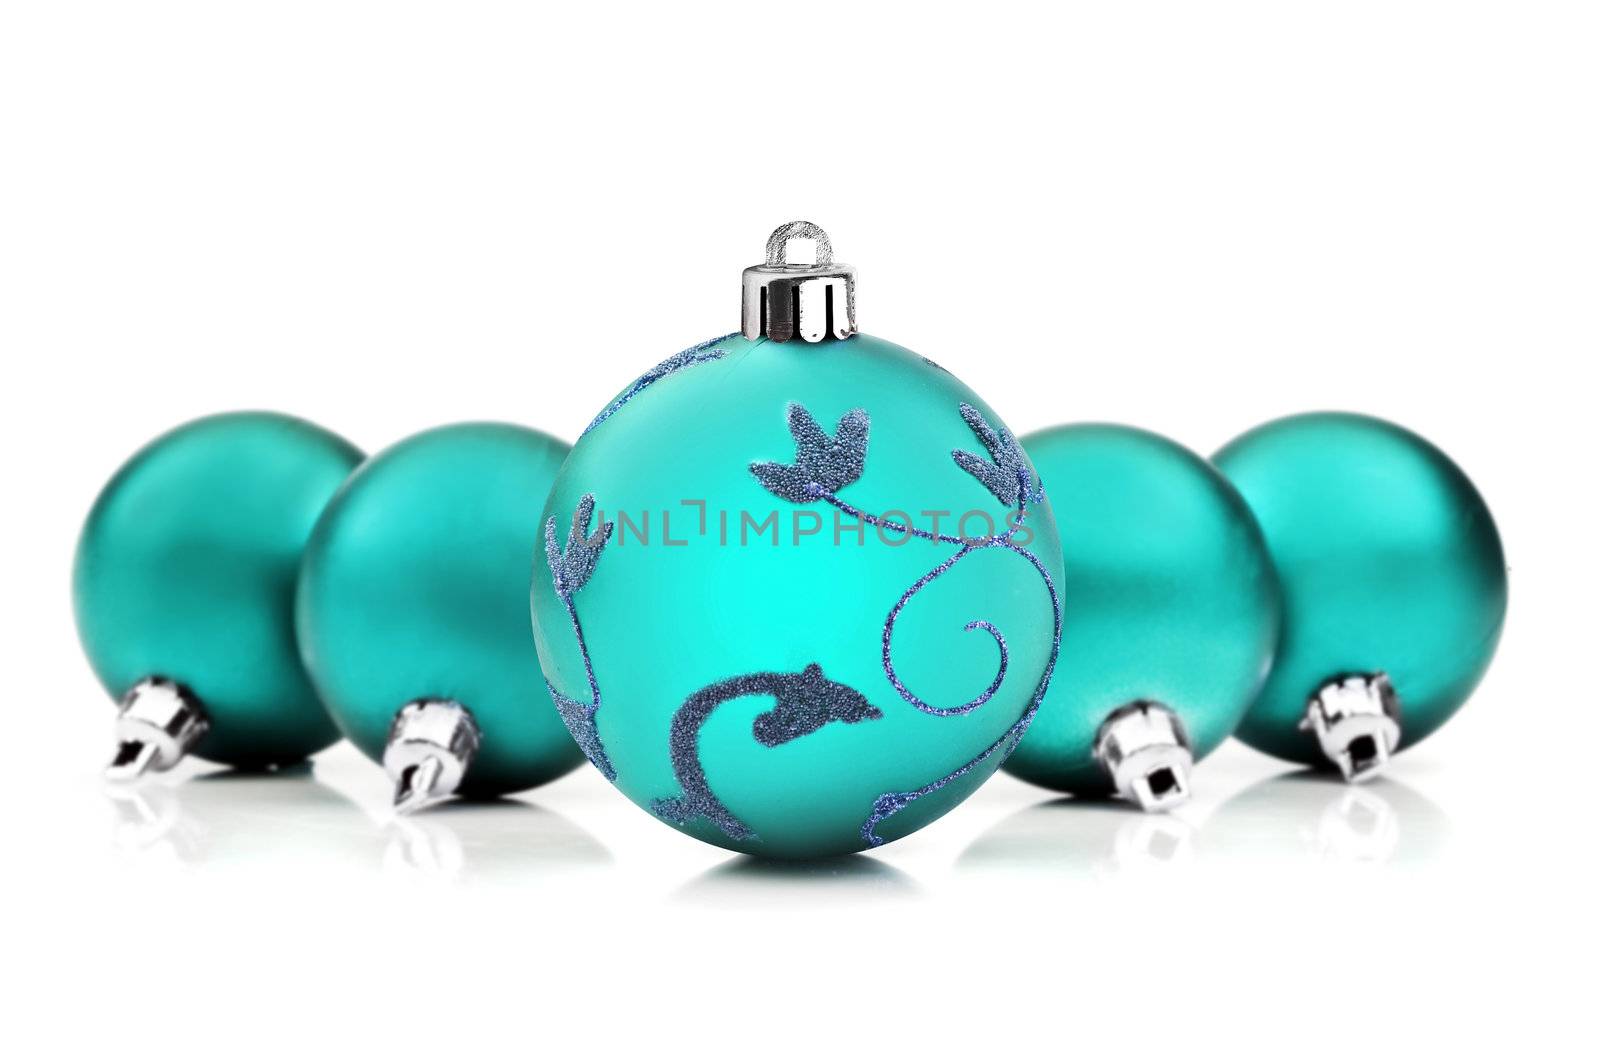 Blue christmas baubles on white background with space for text